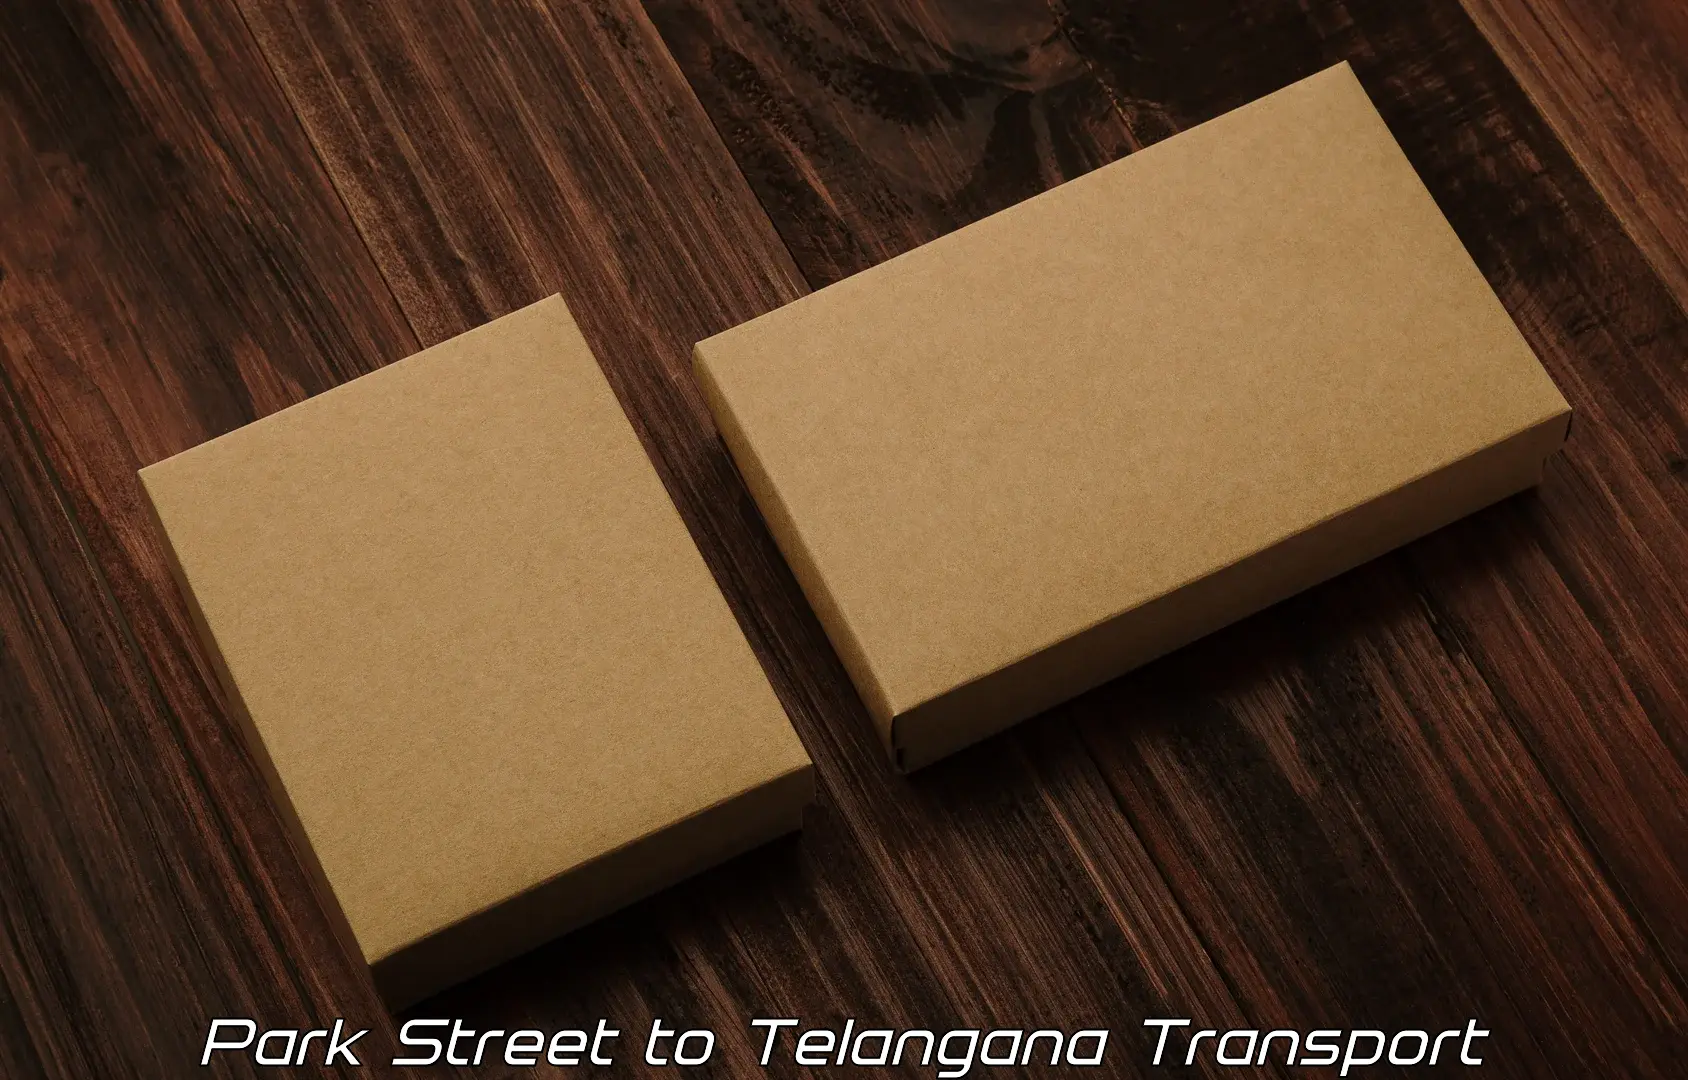 Transport bike from one state to another Park Street to Telangana